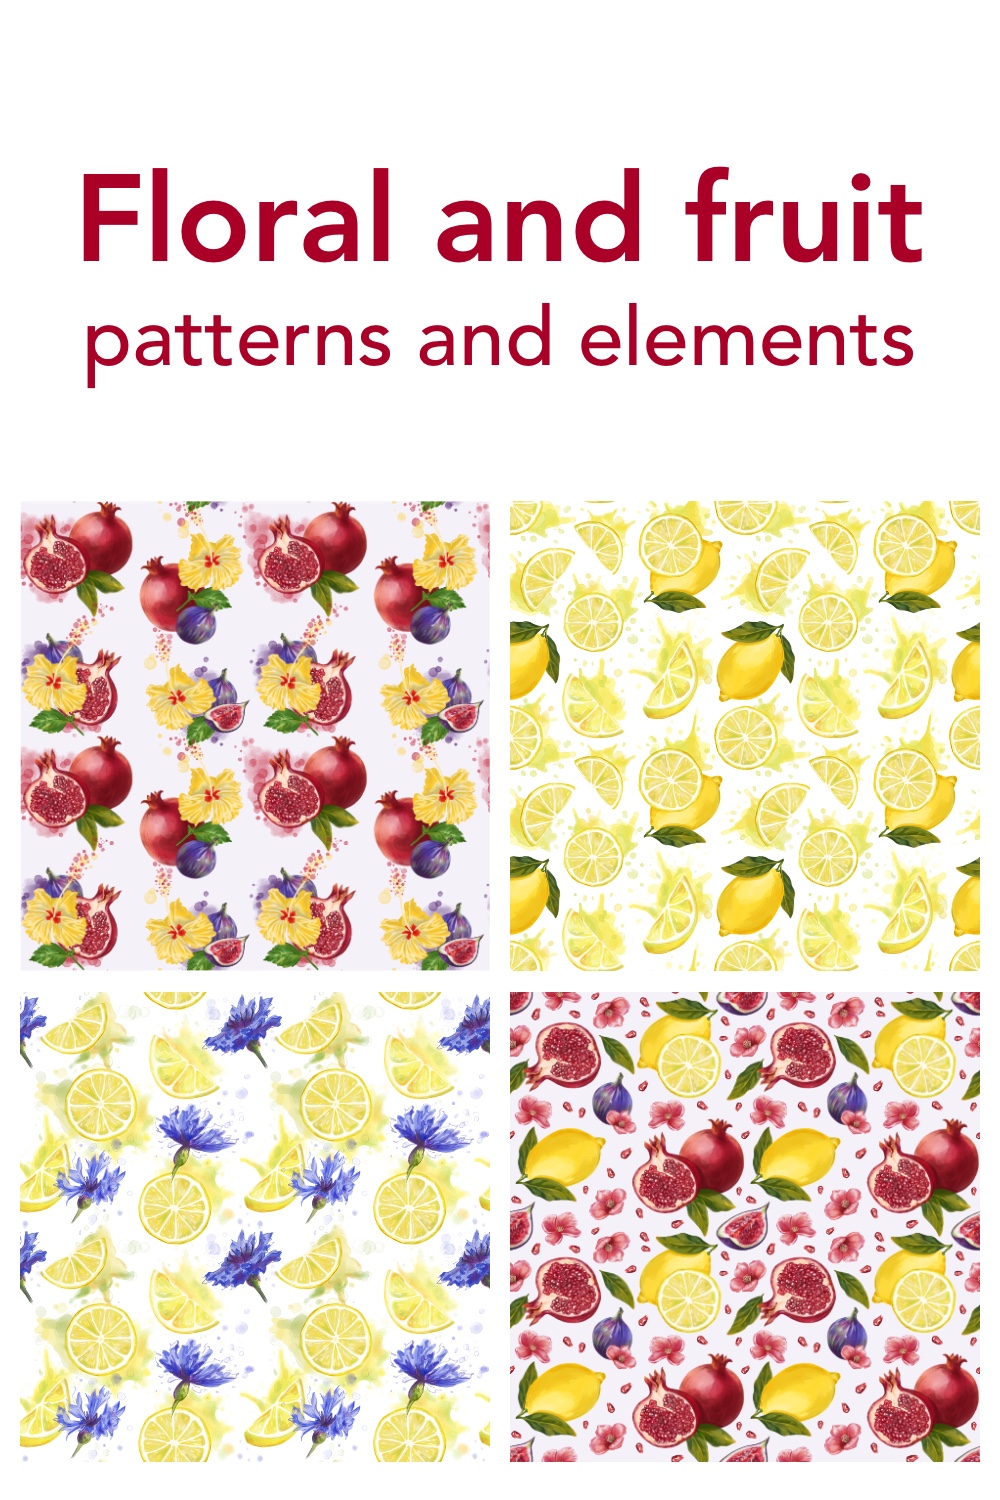 Floral and fruit patterns & elements pinterest preview image.